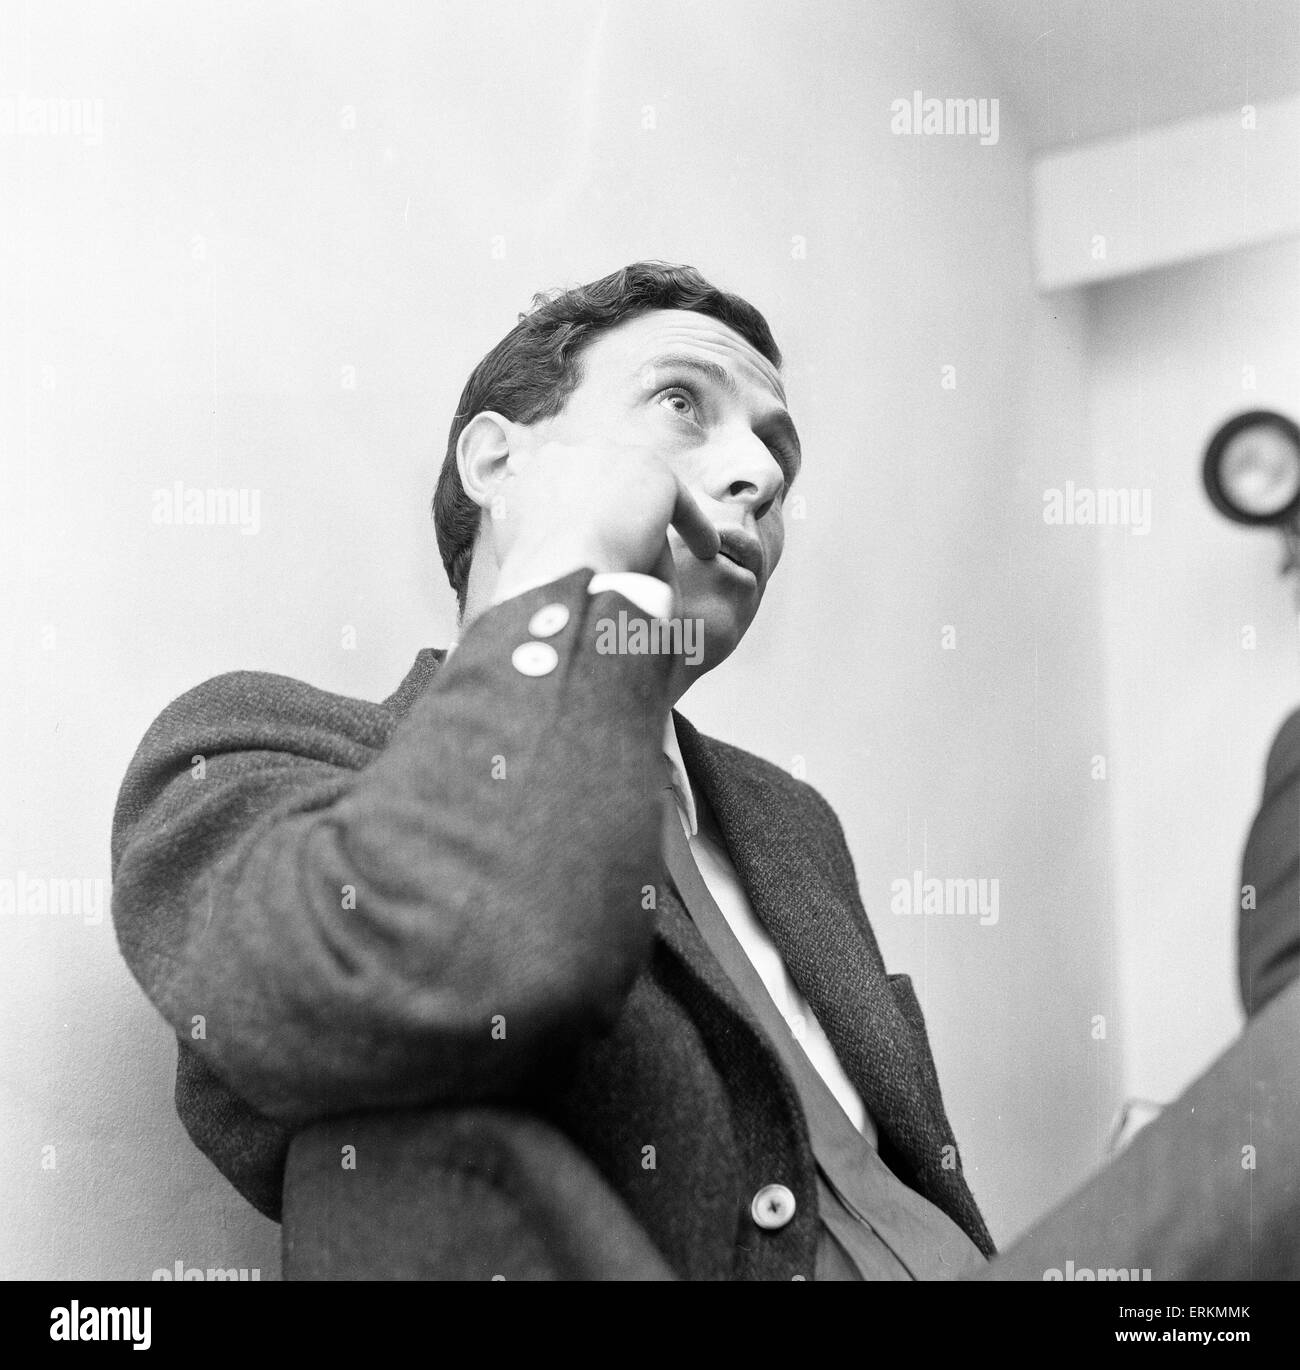 Jim Clark, British Formula One racing driver from Scotland, pictured at news press conference, 9th September 1963. Jim Clark won two World Championships, in 1963 and 1965. Stock Photo